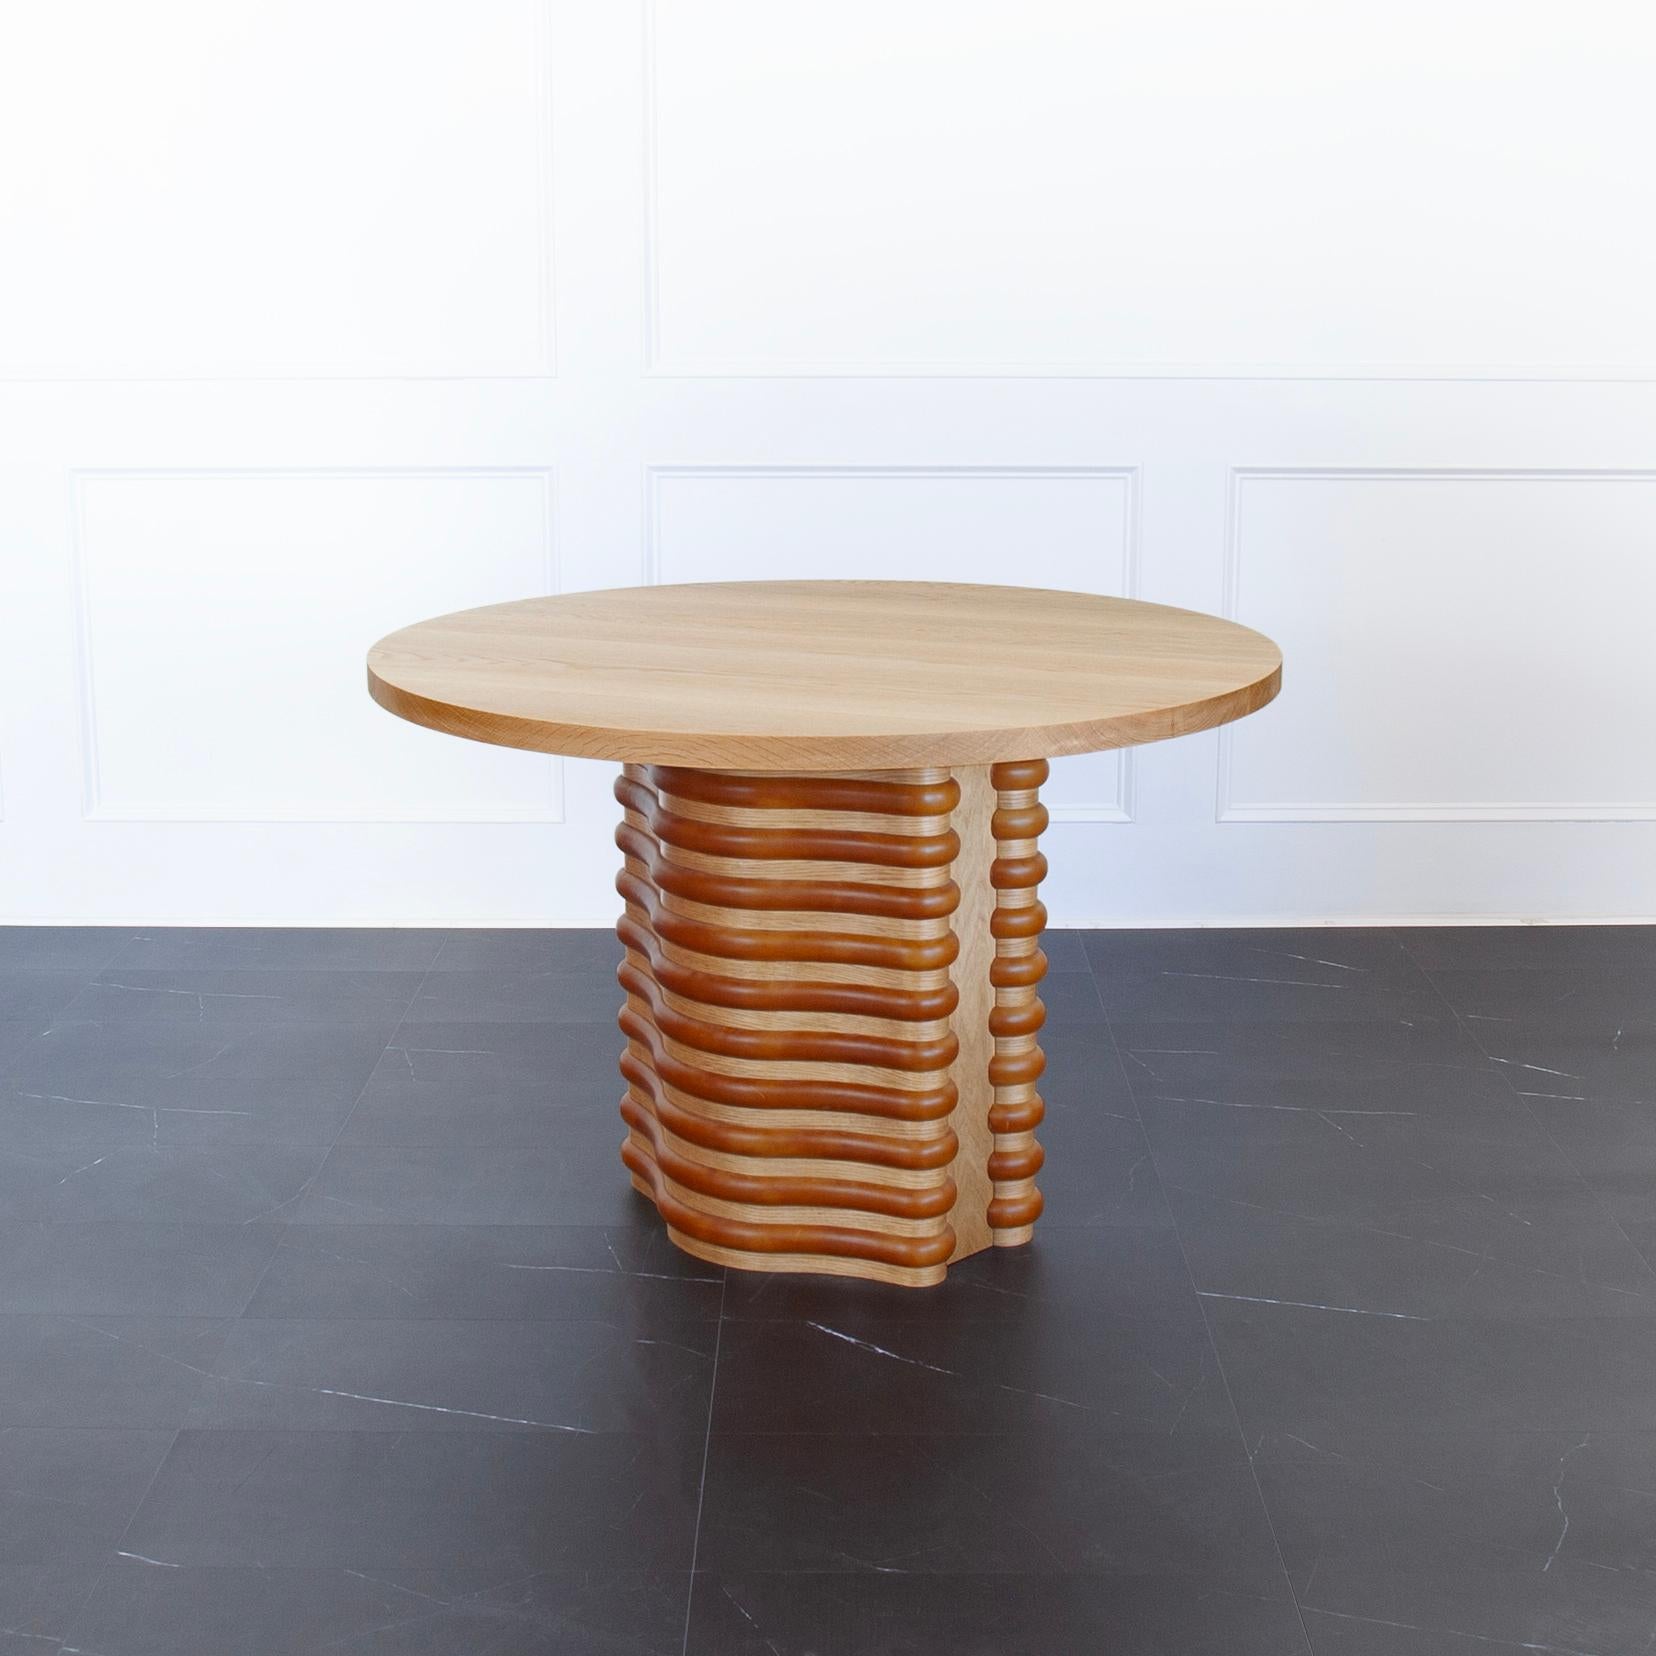 Roslin Pedestal Table by Crump and Kwash 

Features a solid wood table top with acrylic sealer / solid wood and leather wrapped ribs / adjustable leveling feet 

Size: 
48